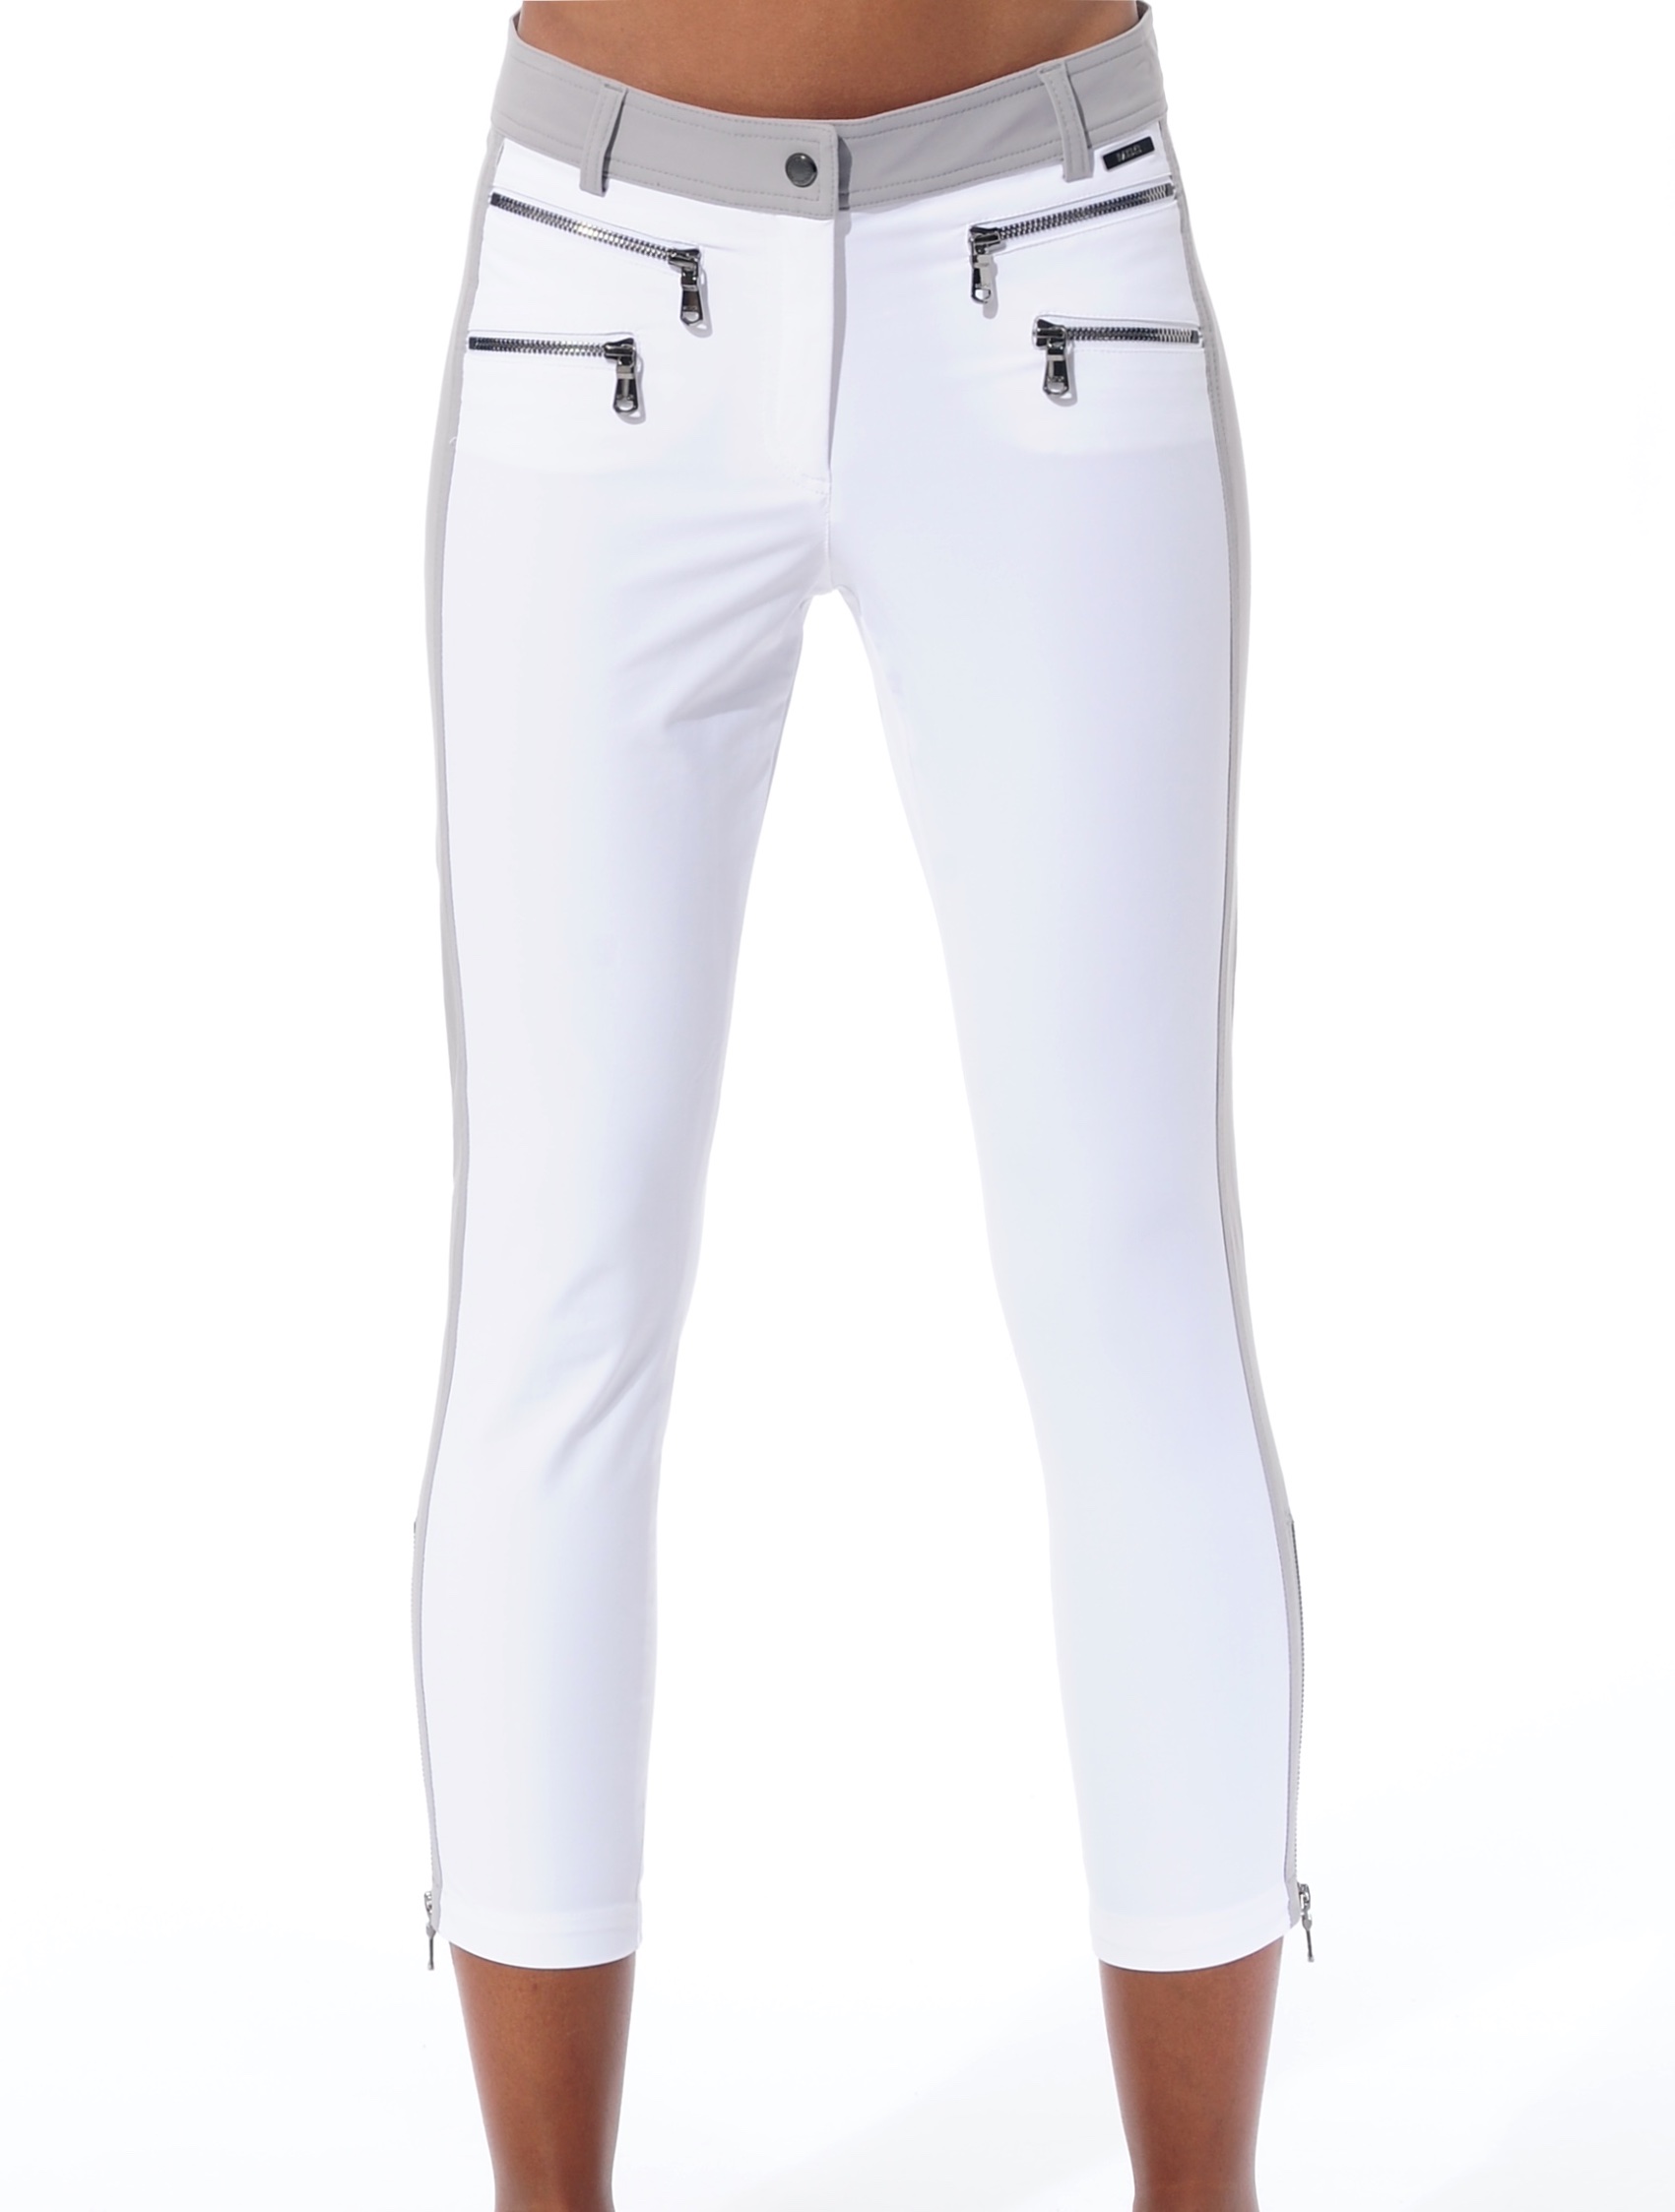 4way stretch double zip cropped pants white/grey 